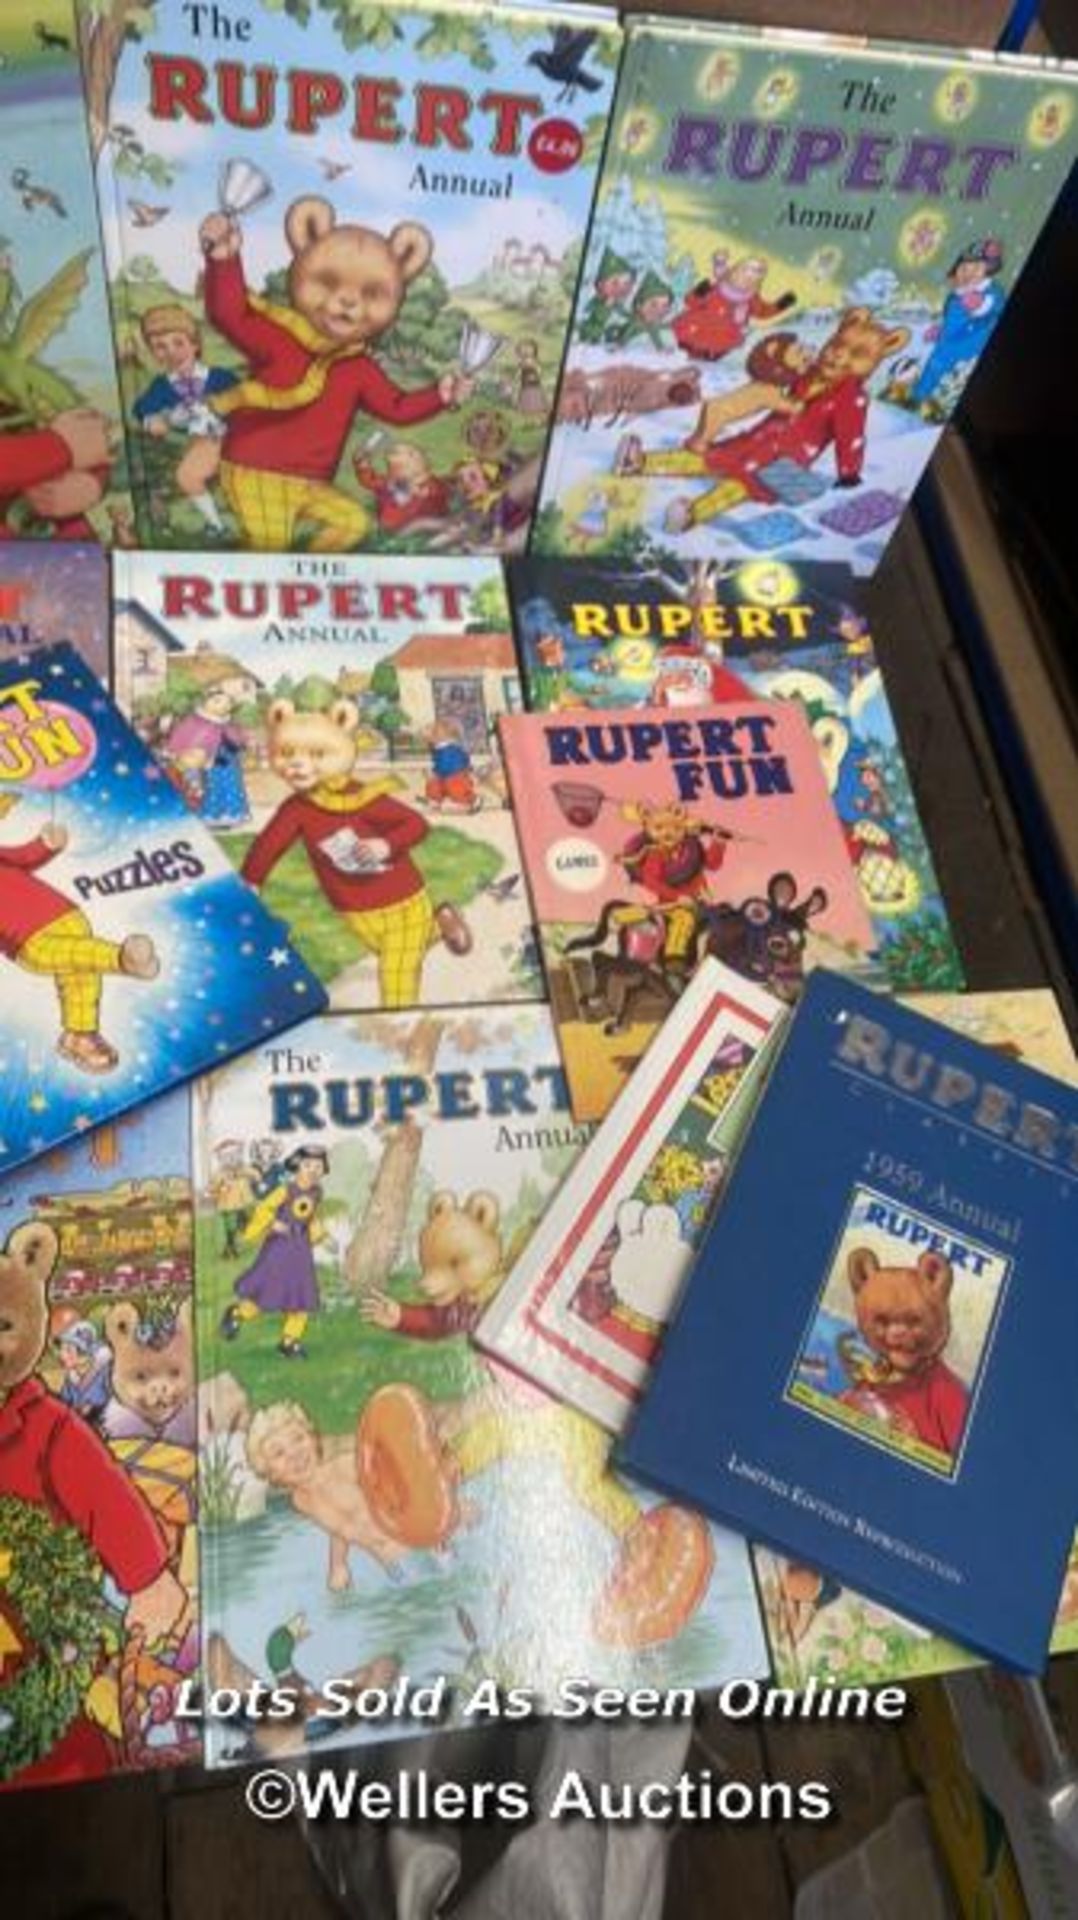 A COLLECTION OF MODERN 1990'S - 2000'S RUPERT BEAR BOOKS AND ANNUALS INCLUDING 1959 ANNUAL LIMITED - Image 7 of 7